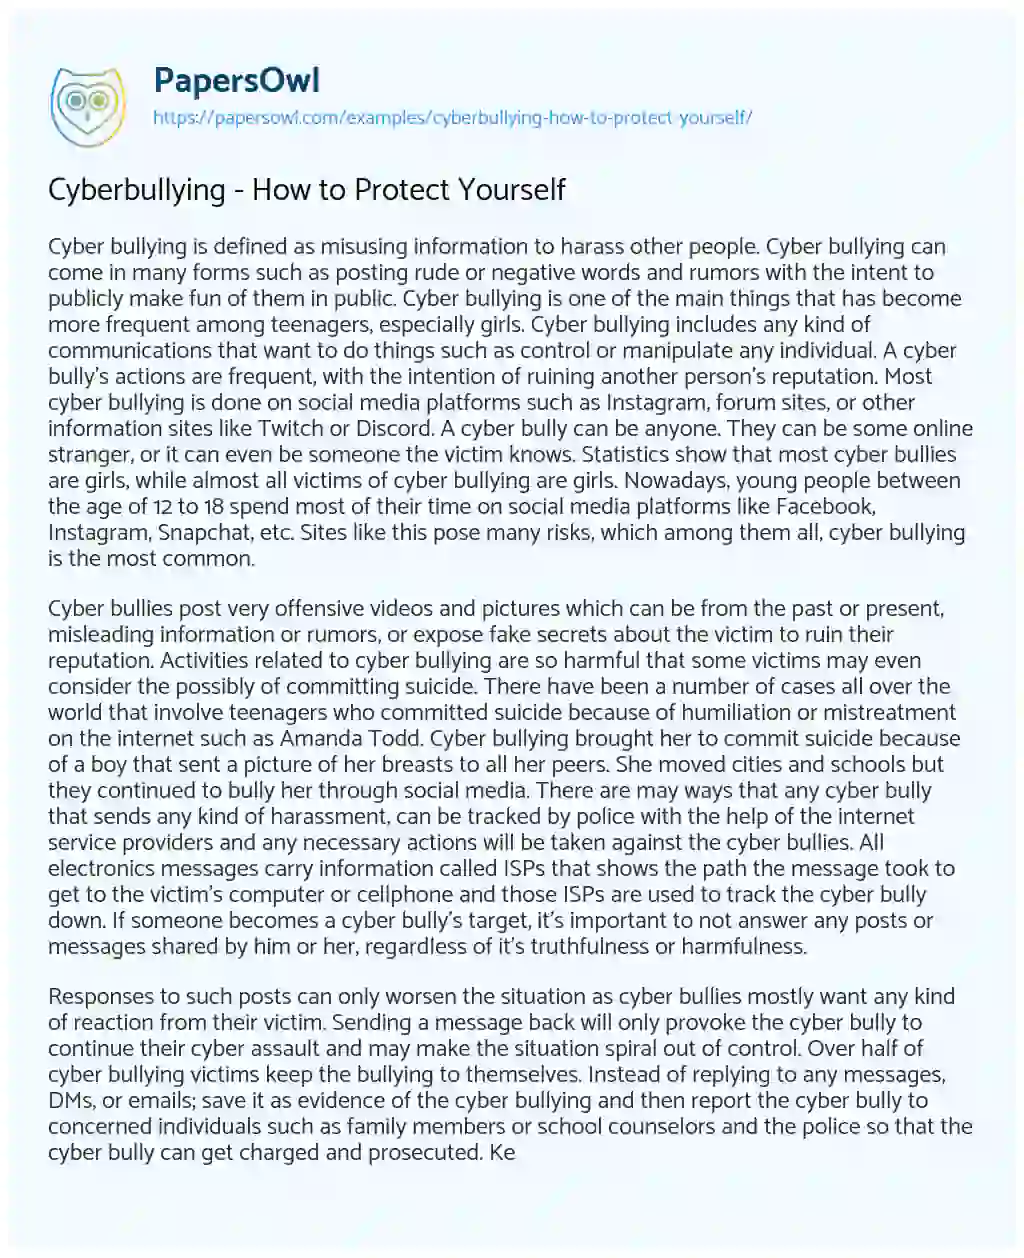 Essay on Cyberbullying – how to Protect yourself